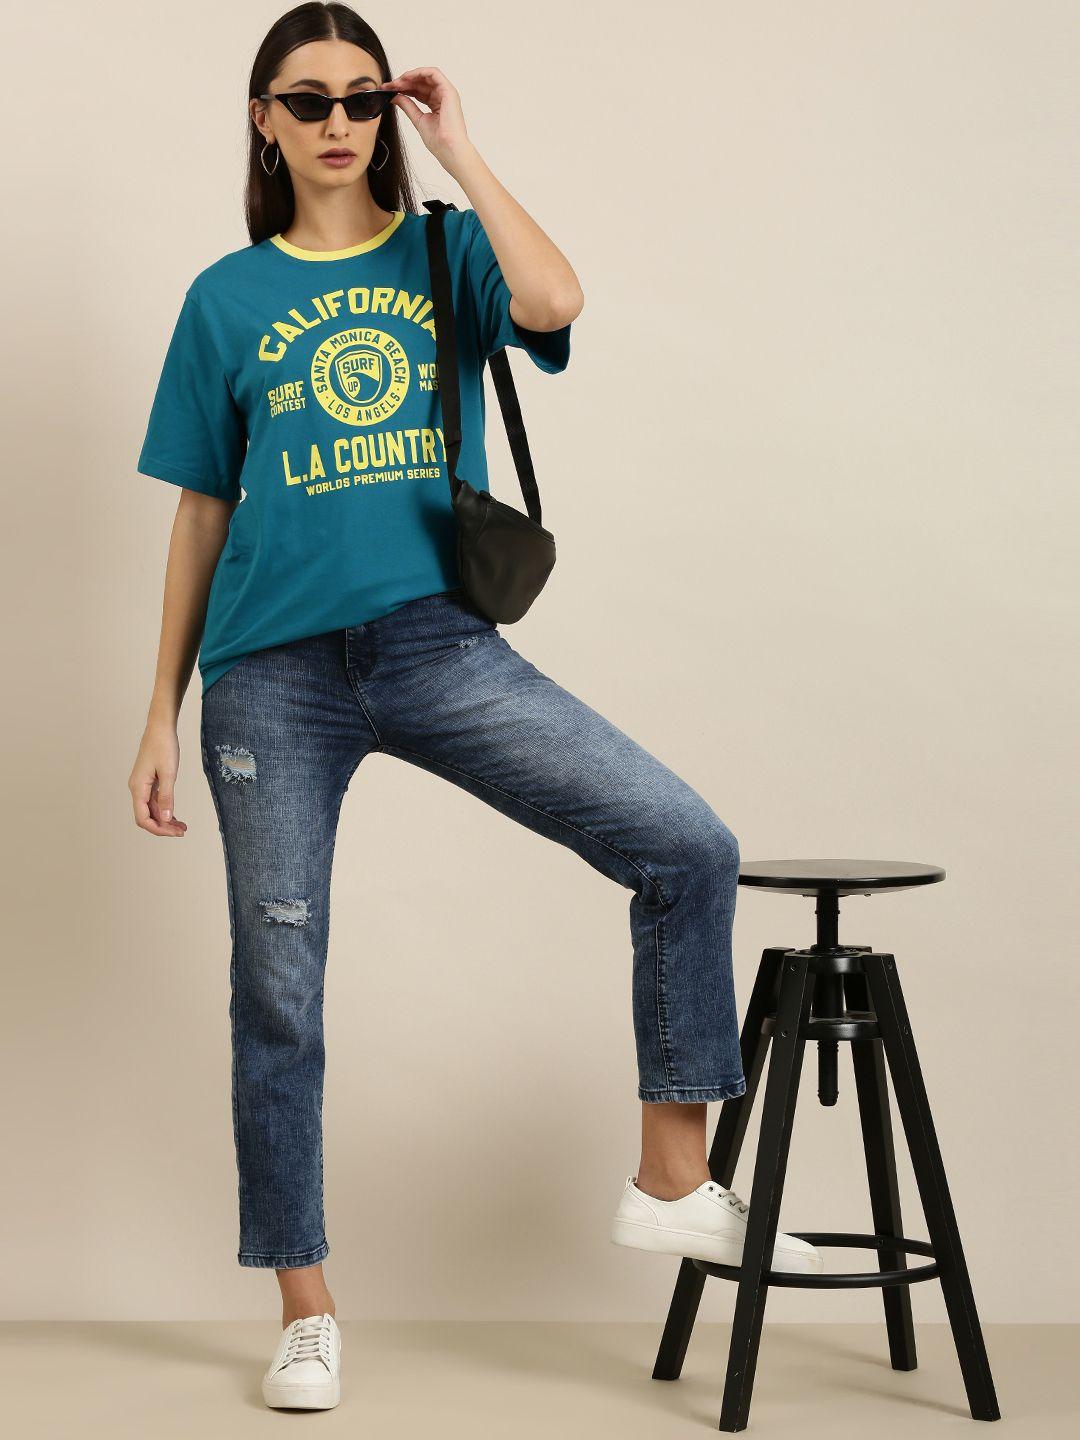 dillinger-women-teal-blue-printed-pure-cotton-oversized-t-shirt